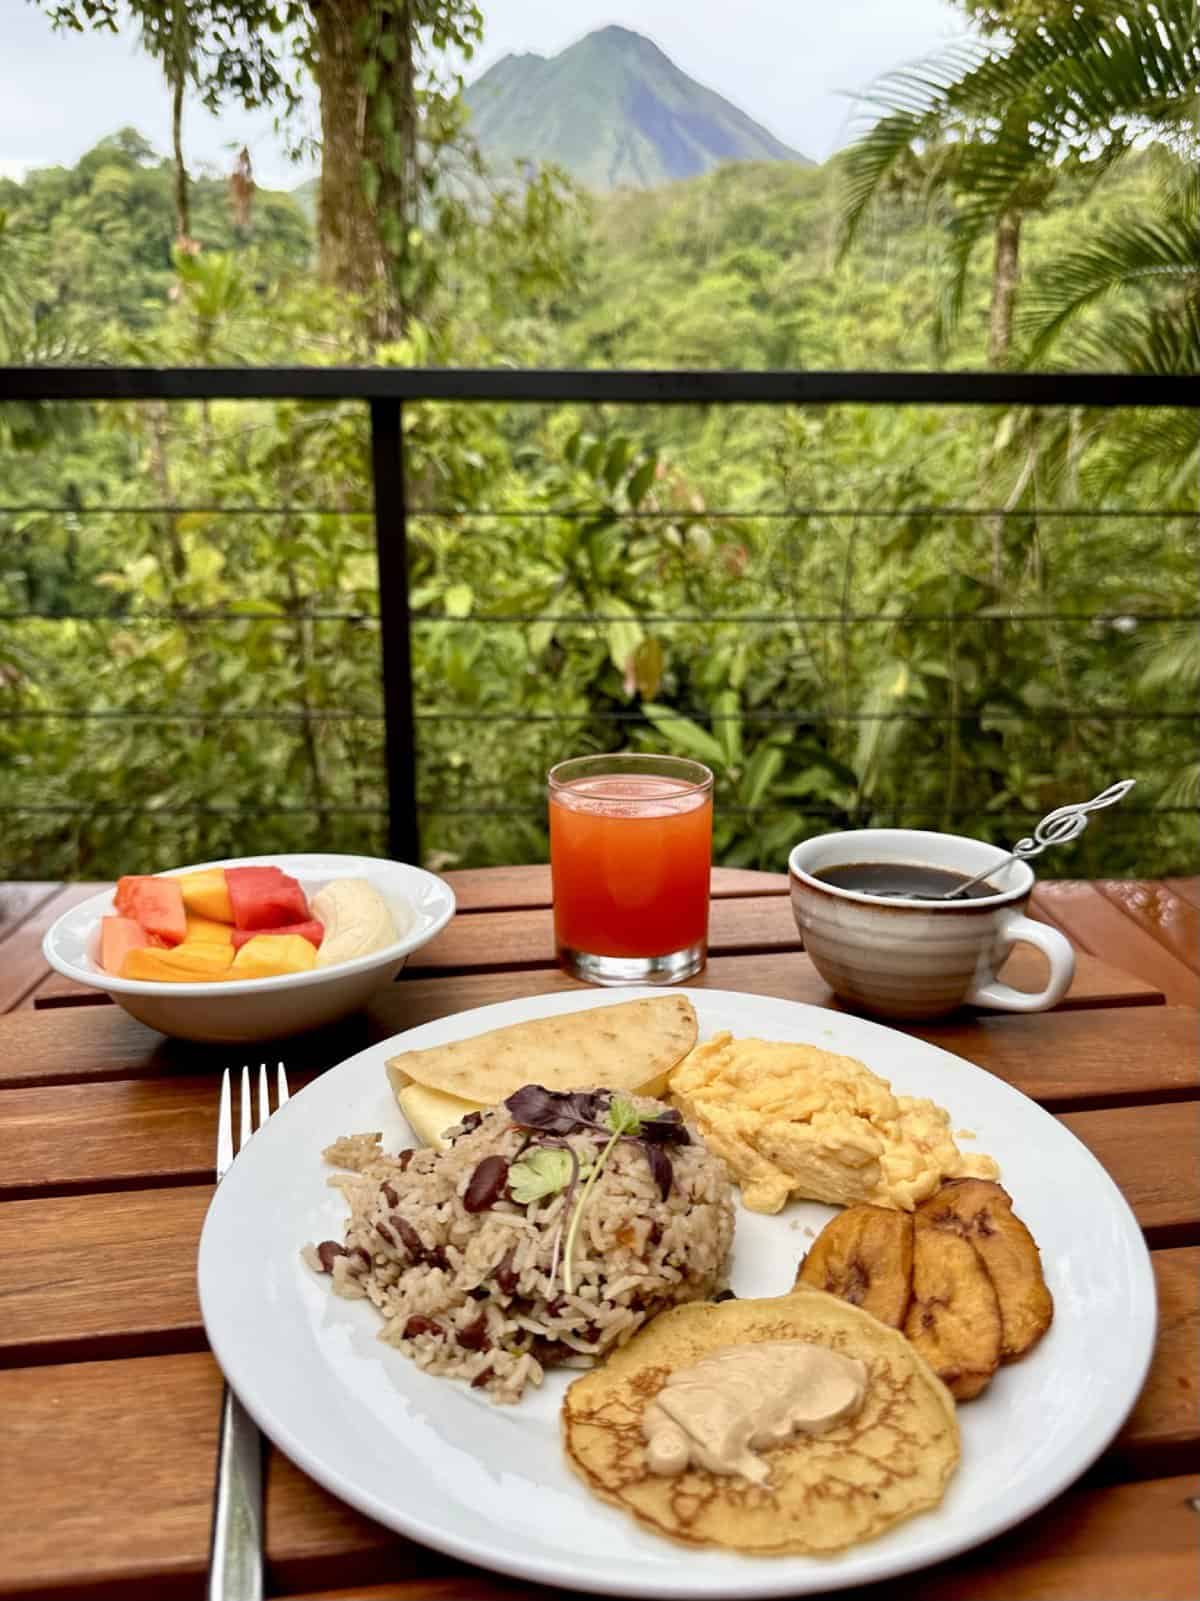 Amor Arenal hotel review - what to expect from this boutique Costa Rica luxury resort, breakfast on my private balcony with views of the Arenal Volcano